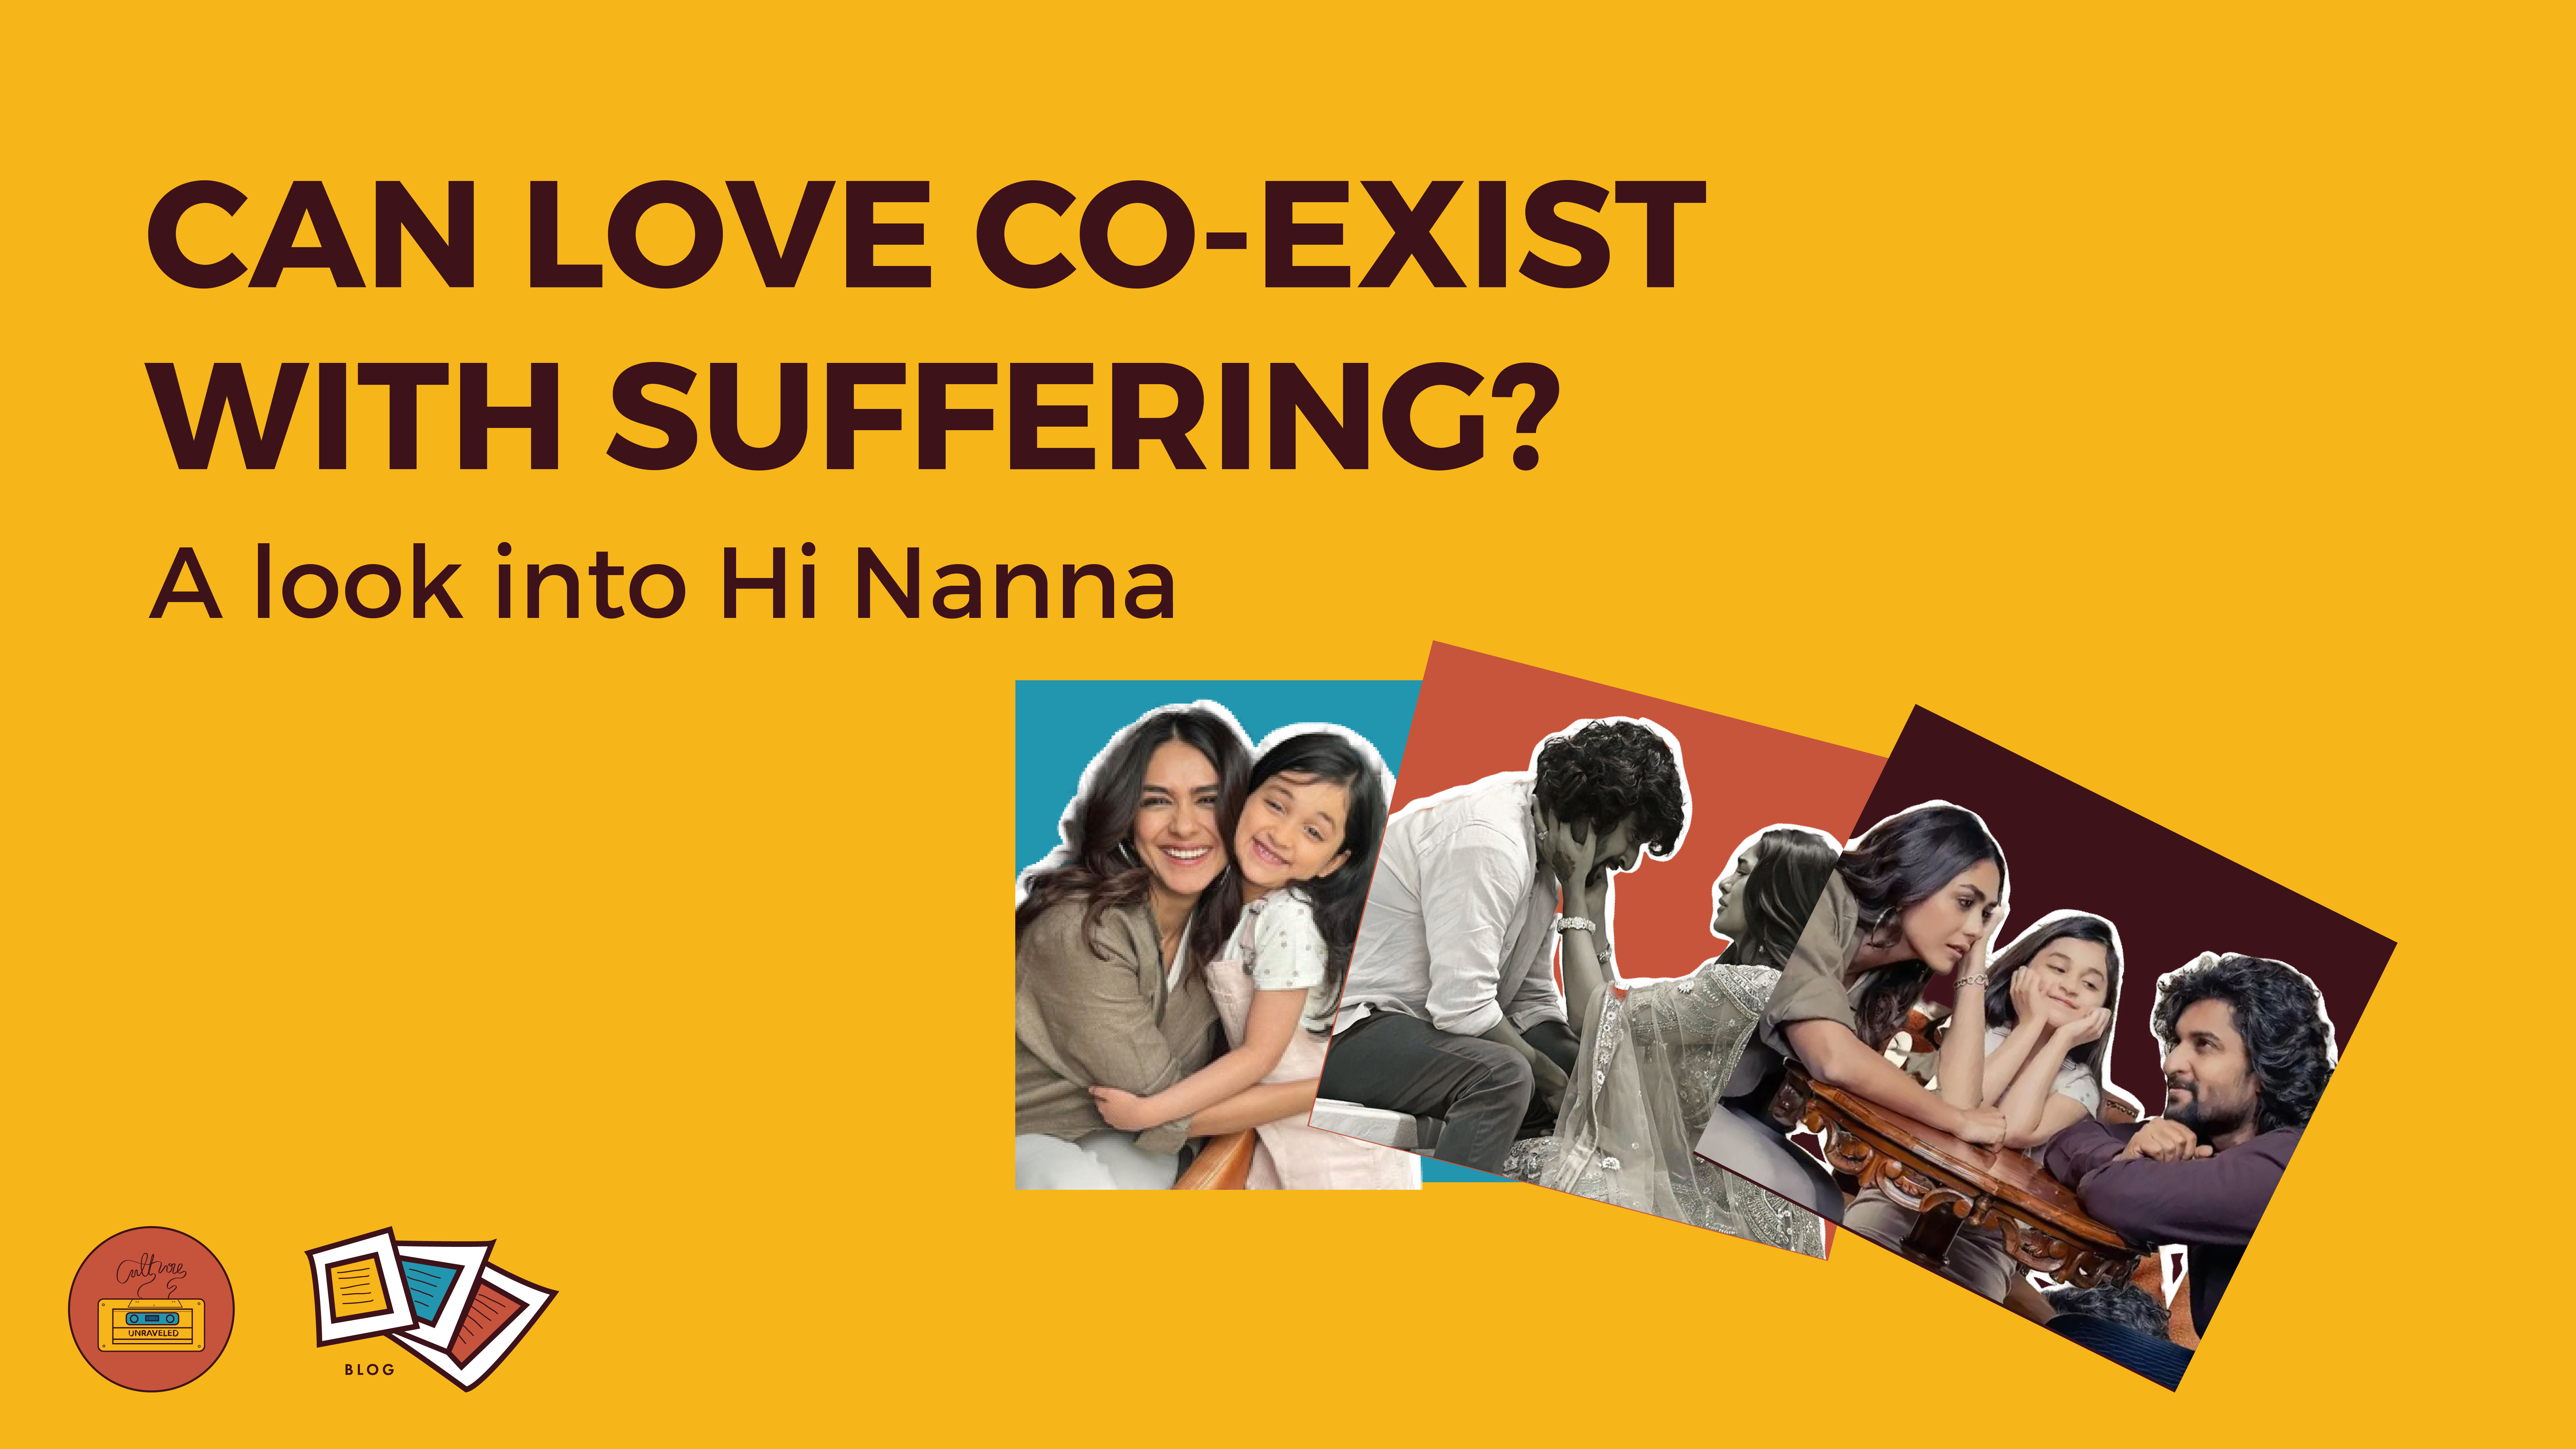 Can Love Co-Exist with Suffering? A look into Hi Nanna